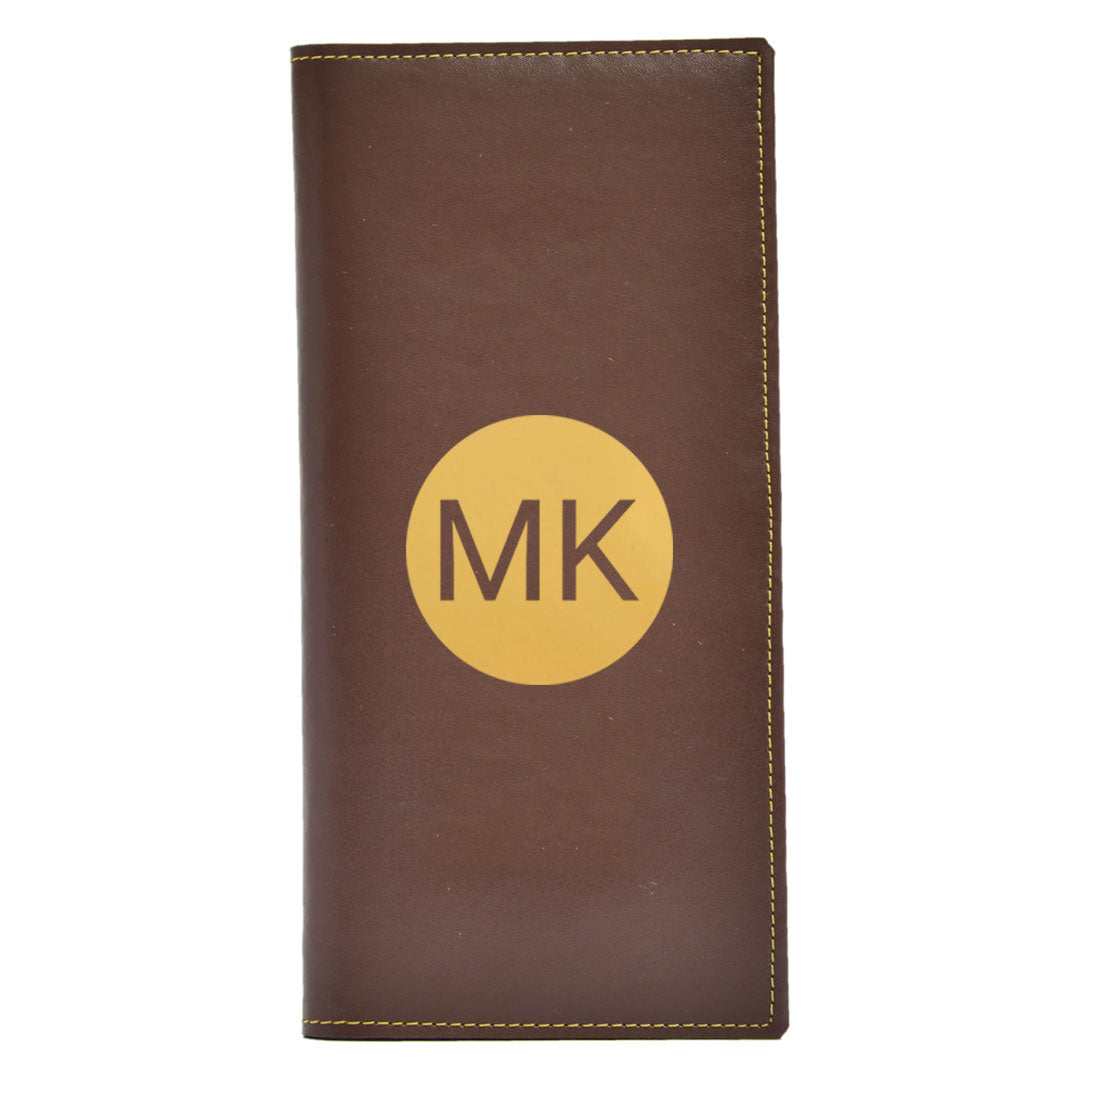 Leather Passport Wallet Case Personalised Travel Organizer - Circle Initials